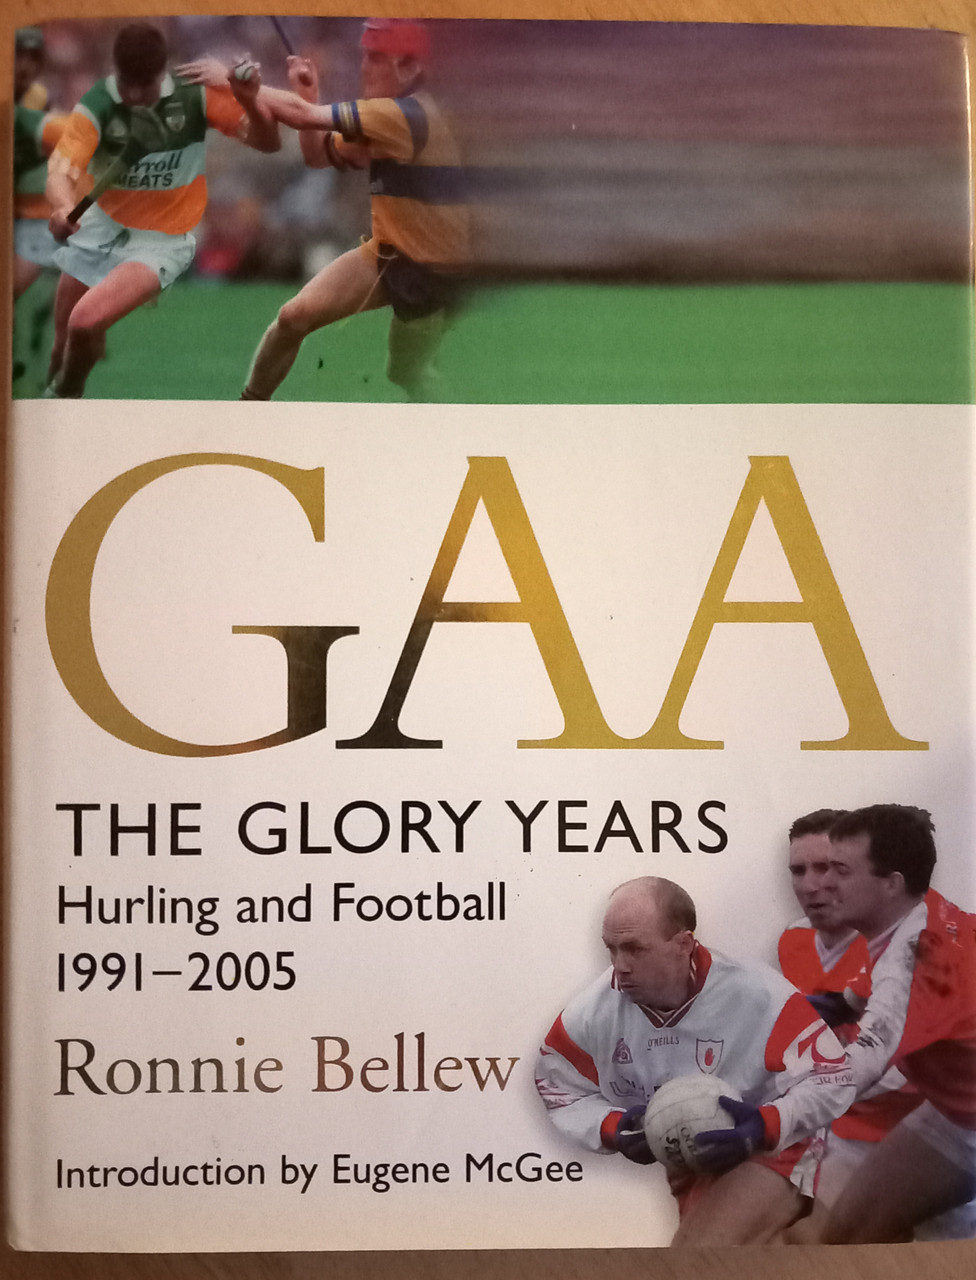 Ronnie Bellew - GAA : The Glory Years  - Hurling and Football 1991-2005 - HB